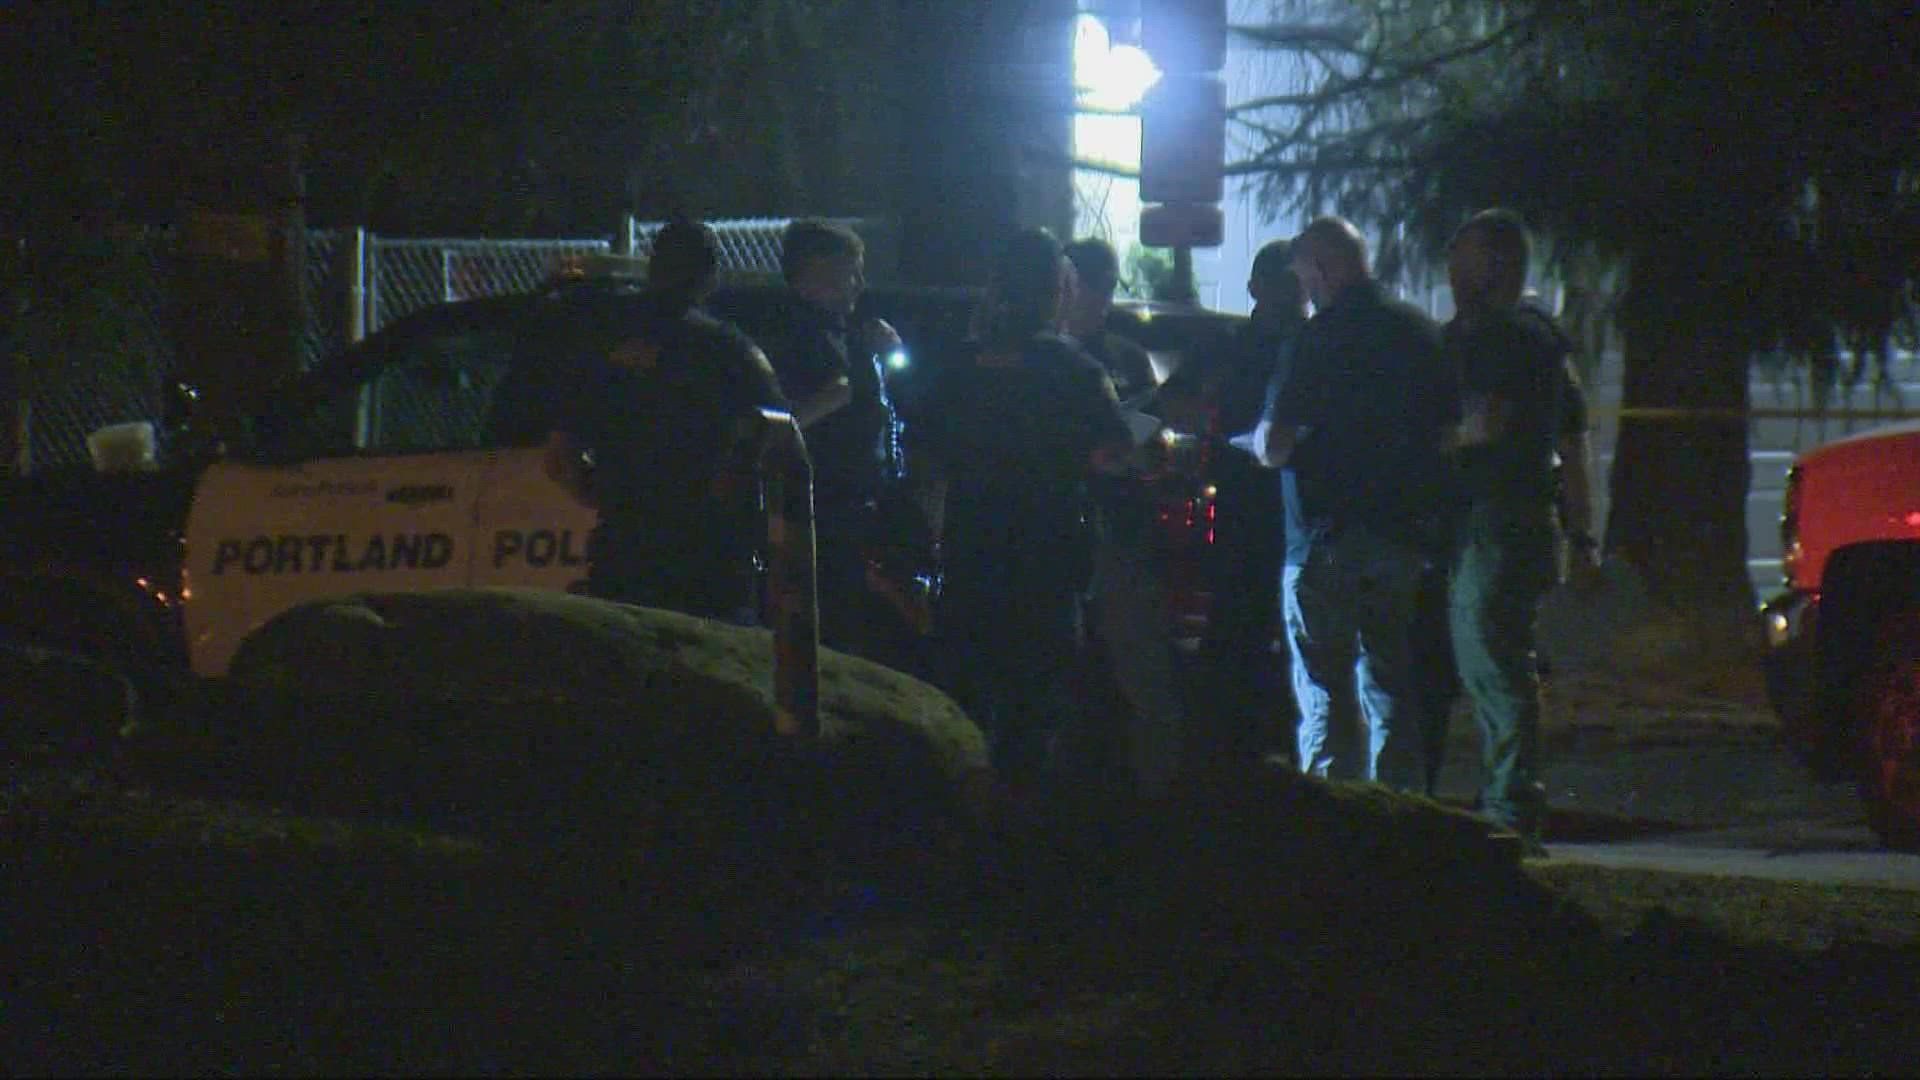 Police are looking for the shooter or shooters who fired dozens of rounds on Rocky Butte in Northeast Portland.